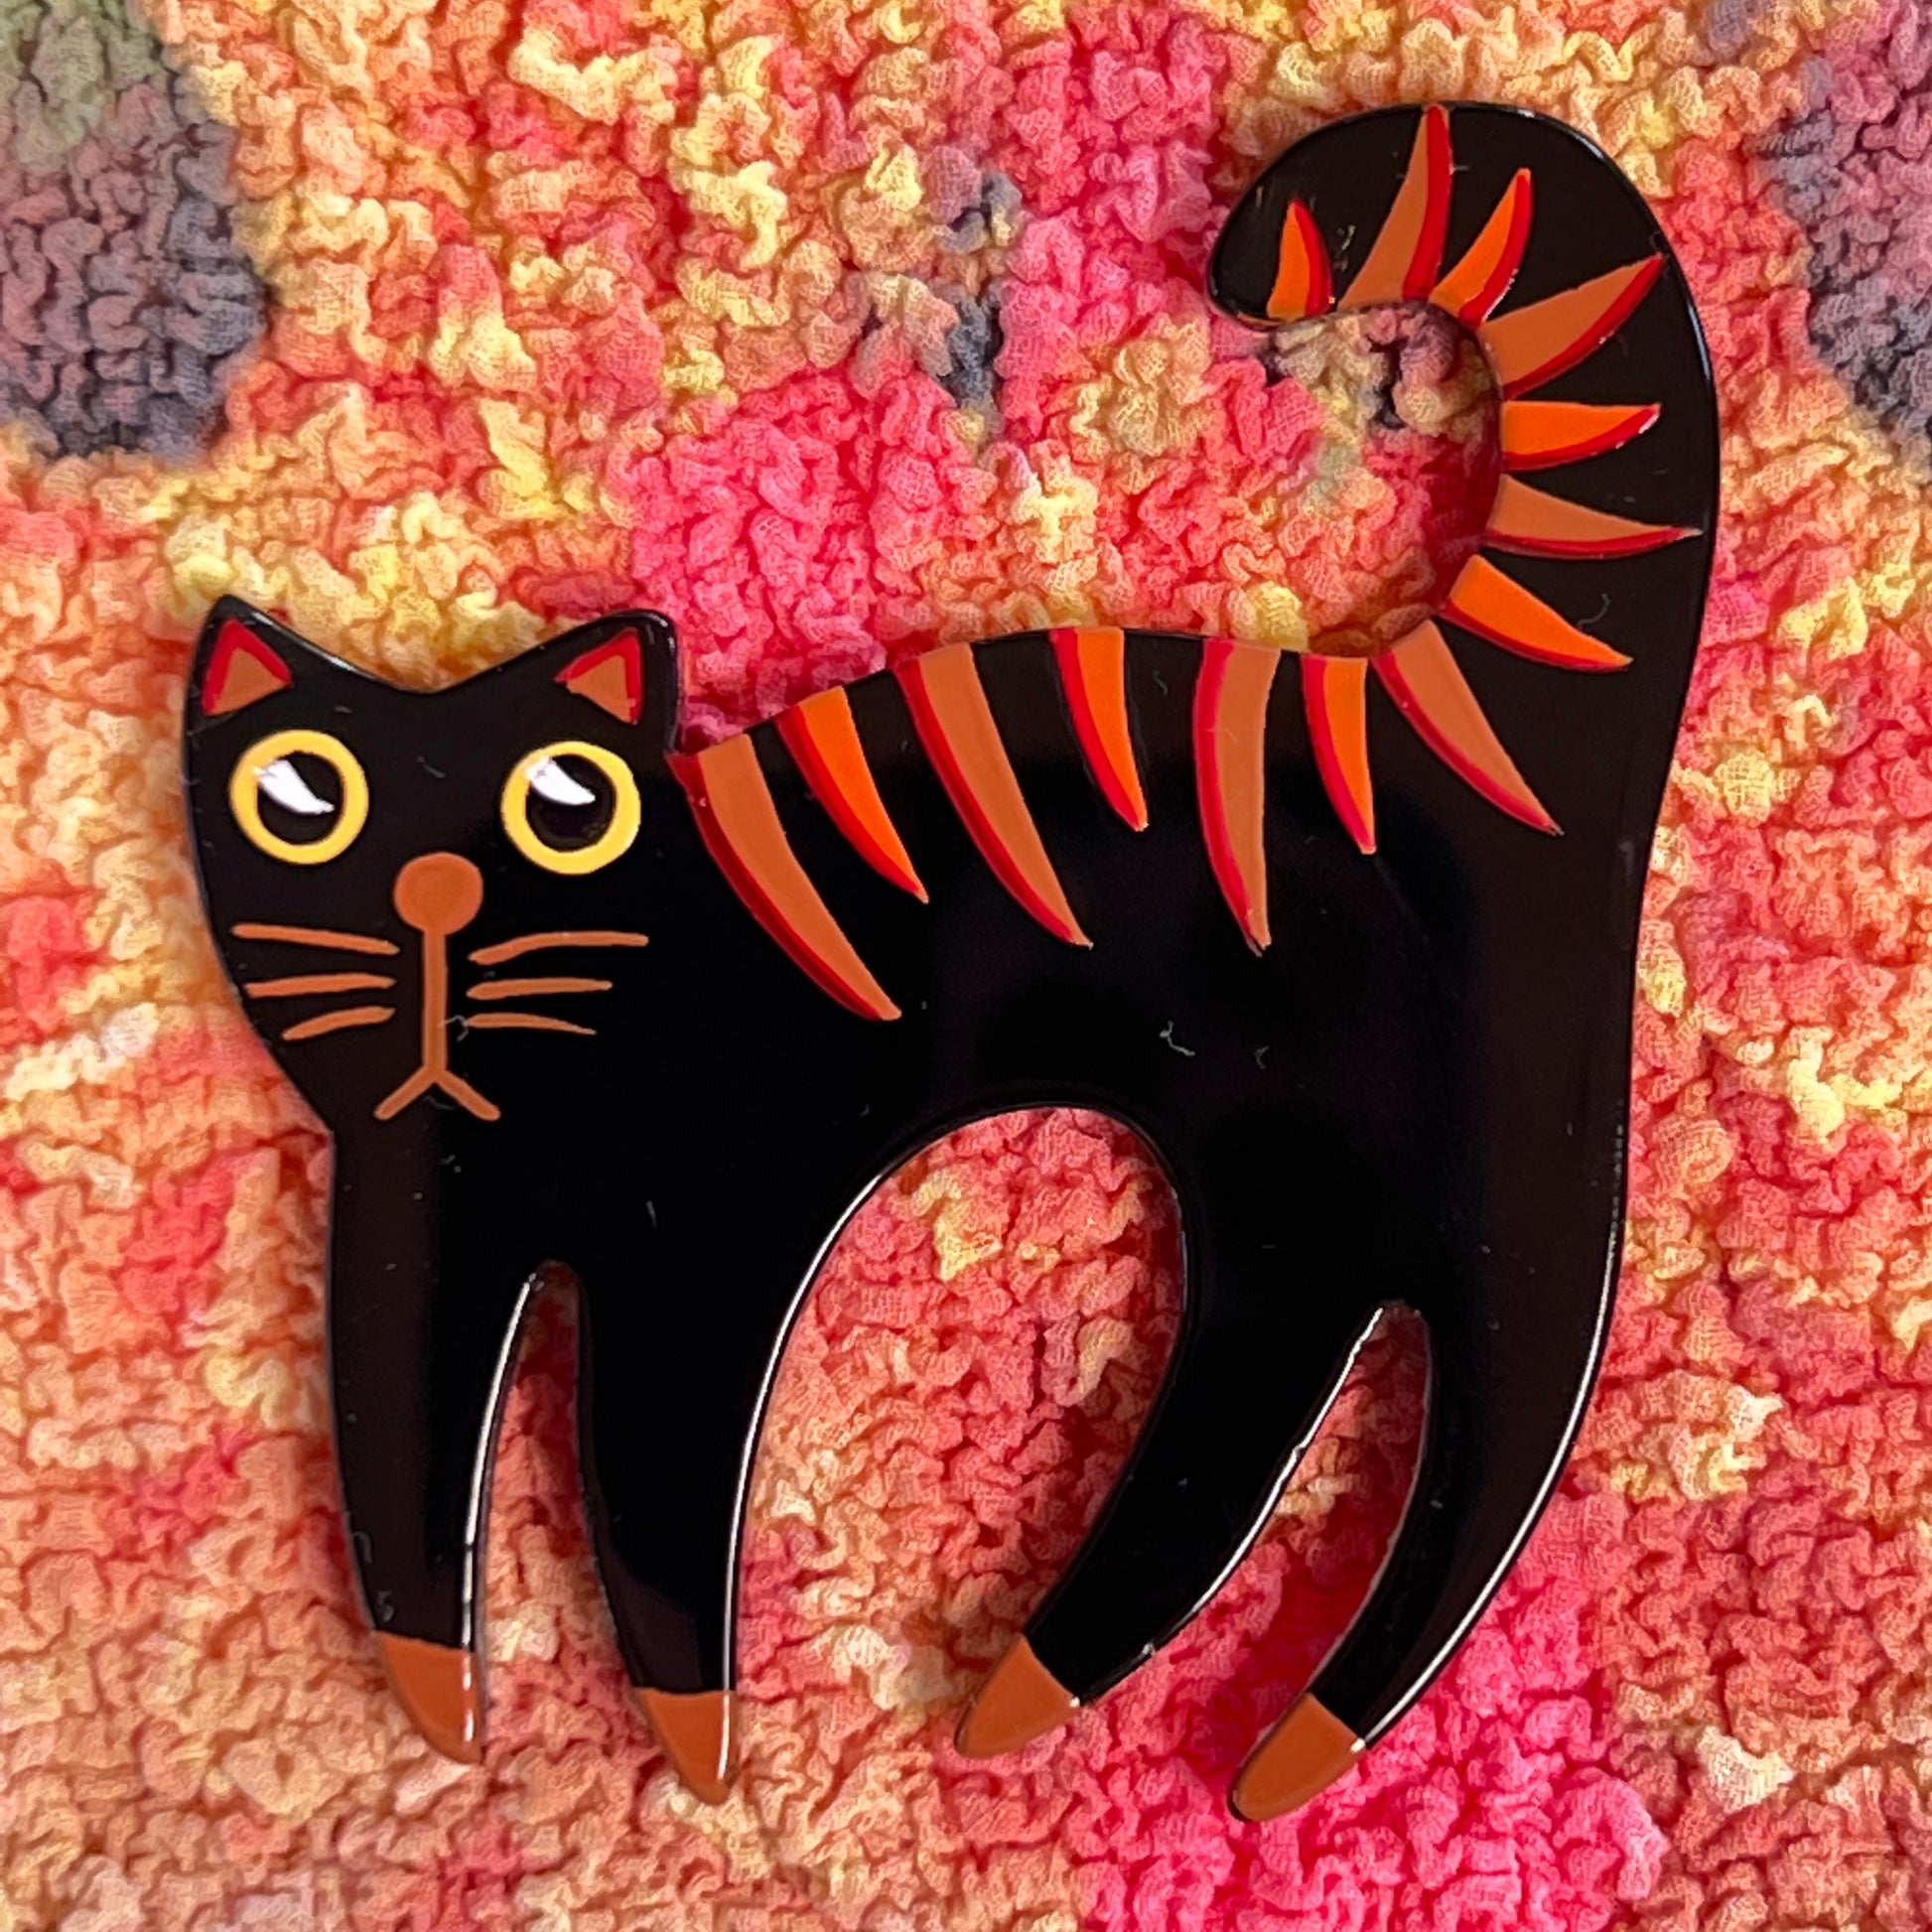 The Wilson Cat Brooch in its Black and Ginger Version in galalith